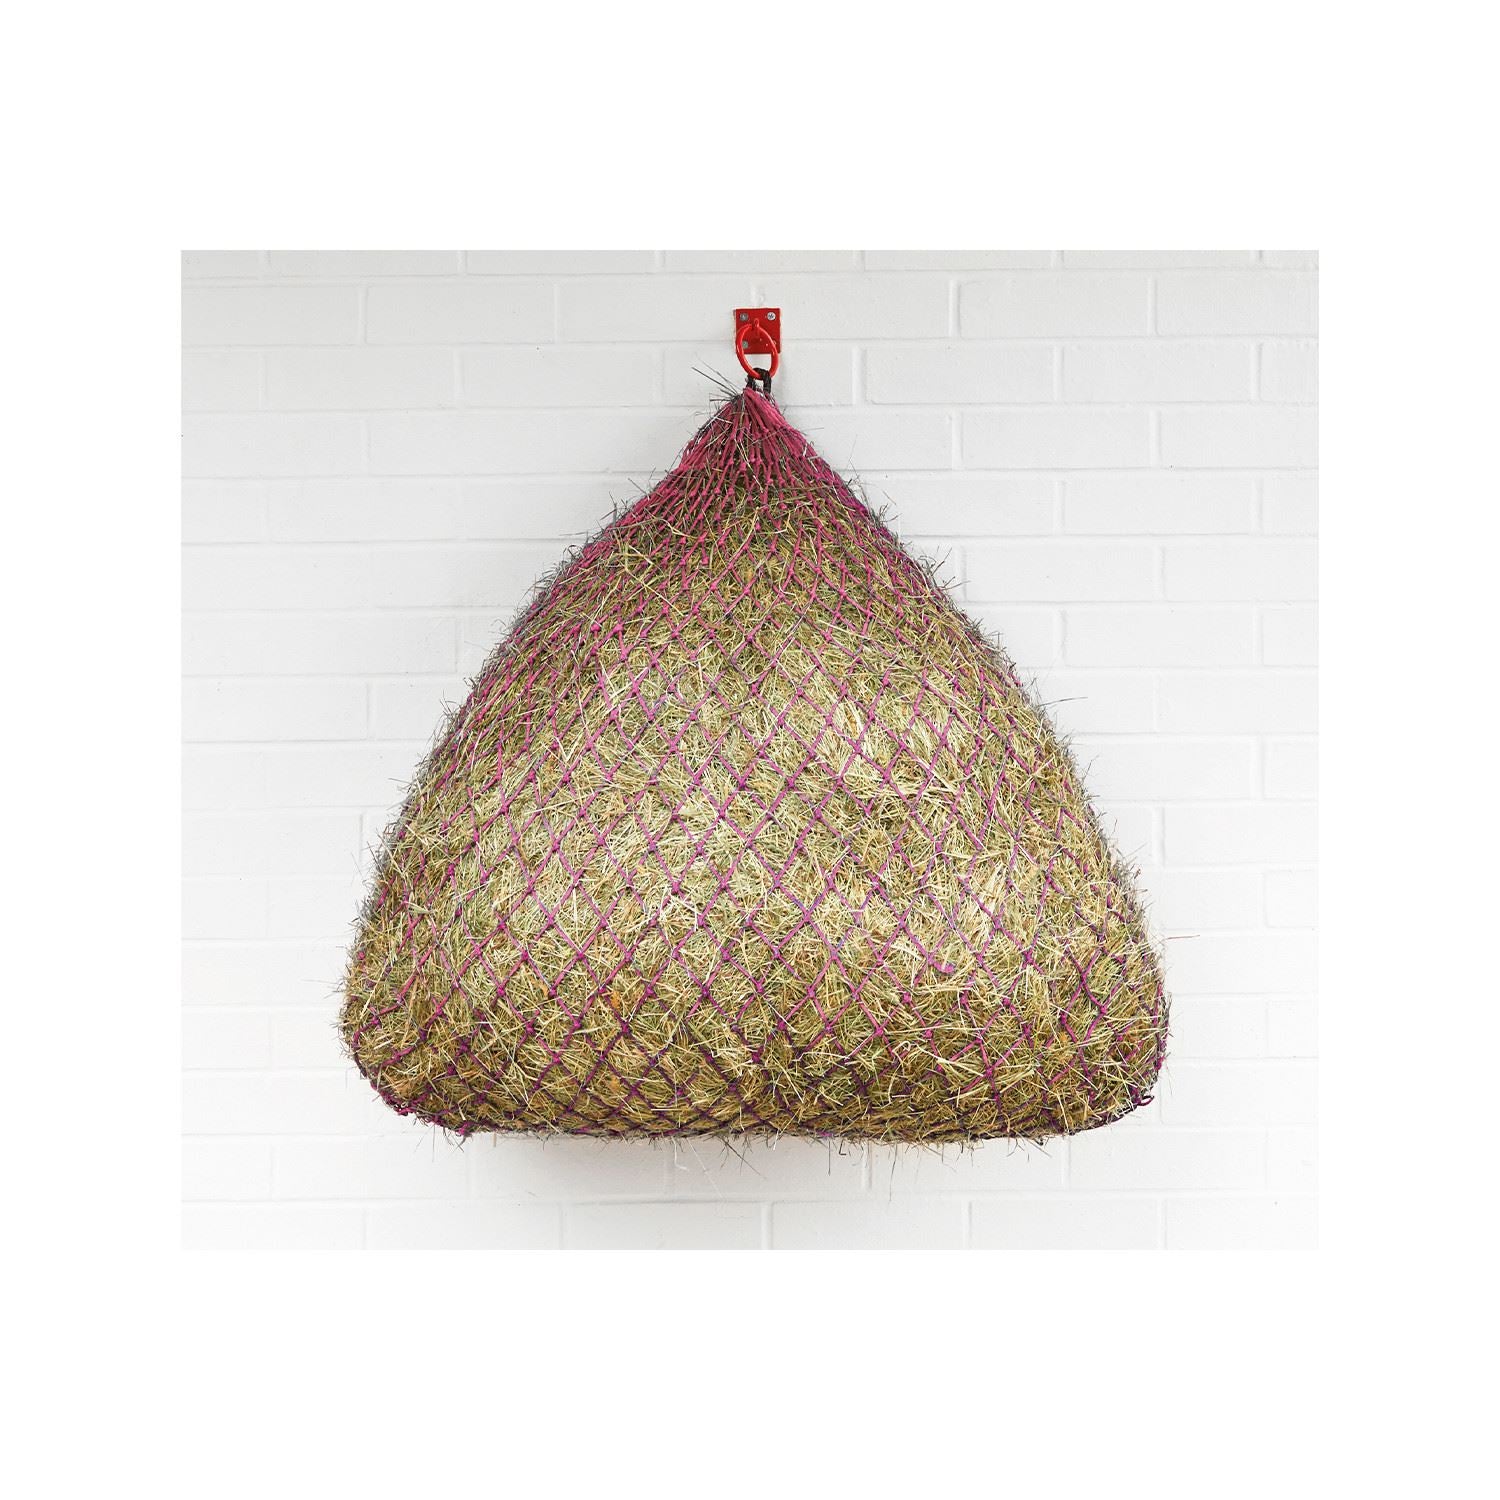 Perry Equestrian 30 Square Bottom Slow Feeder Polypropylene Hay/Haylage Net - Small 4.0Kg capacity" - Just Horse Riders